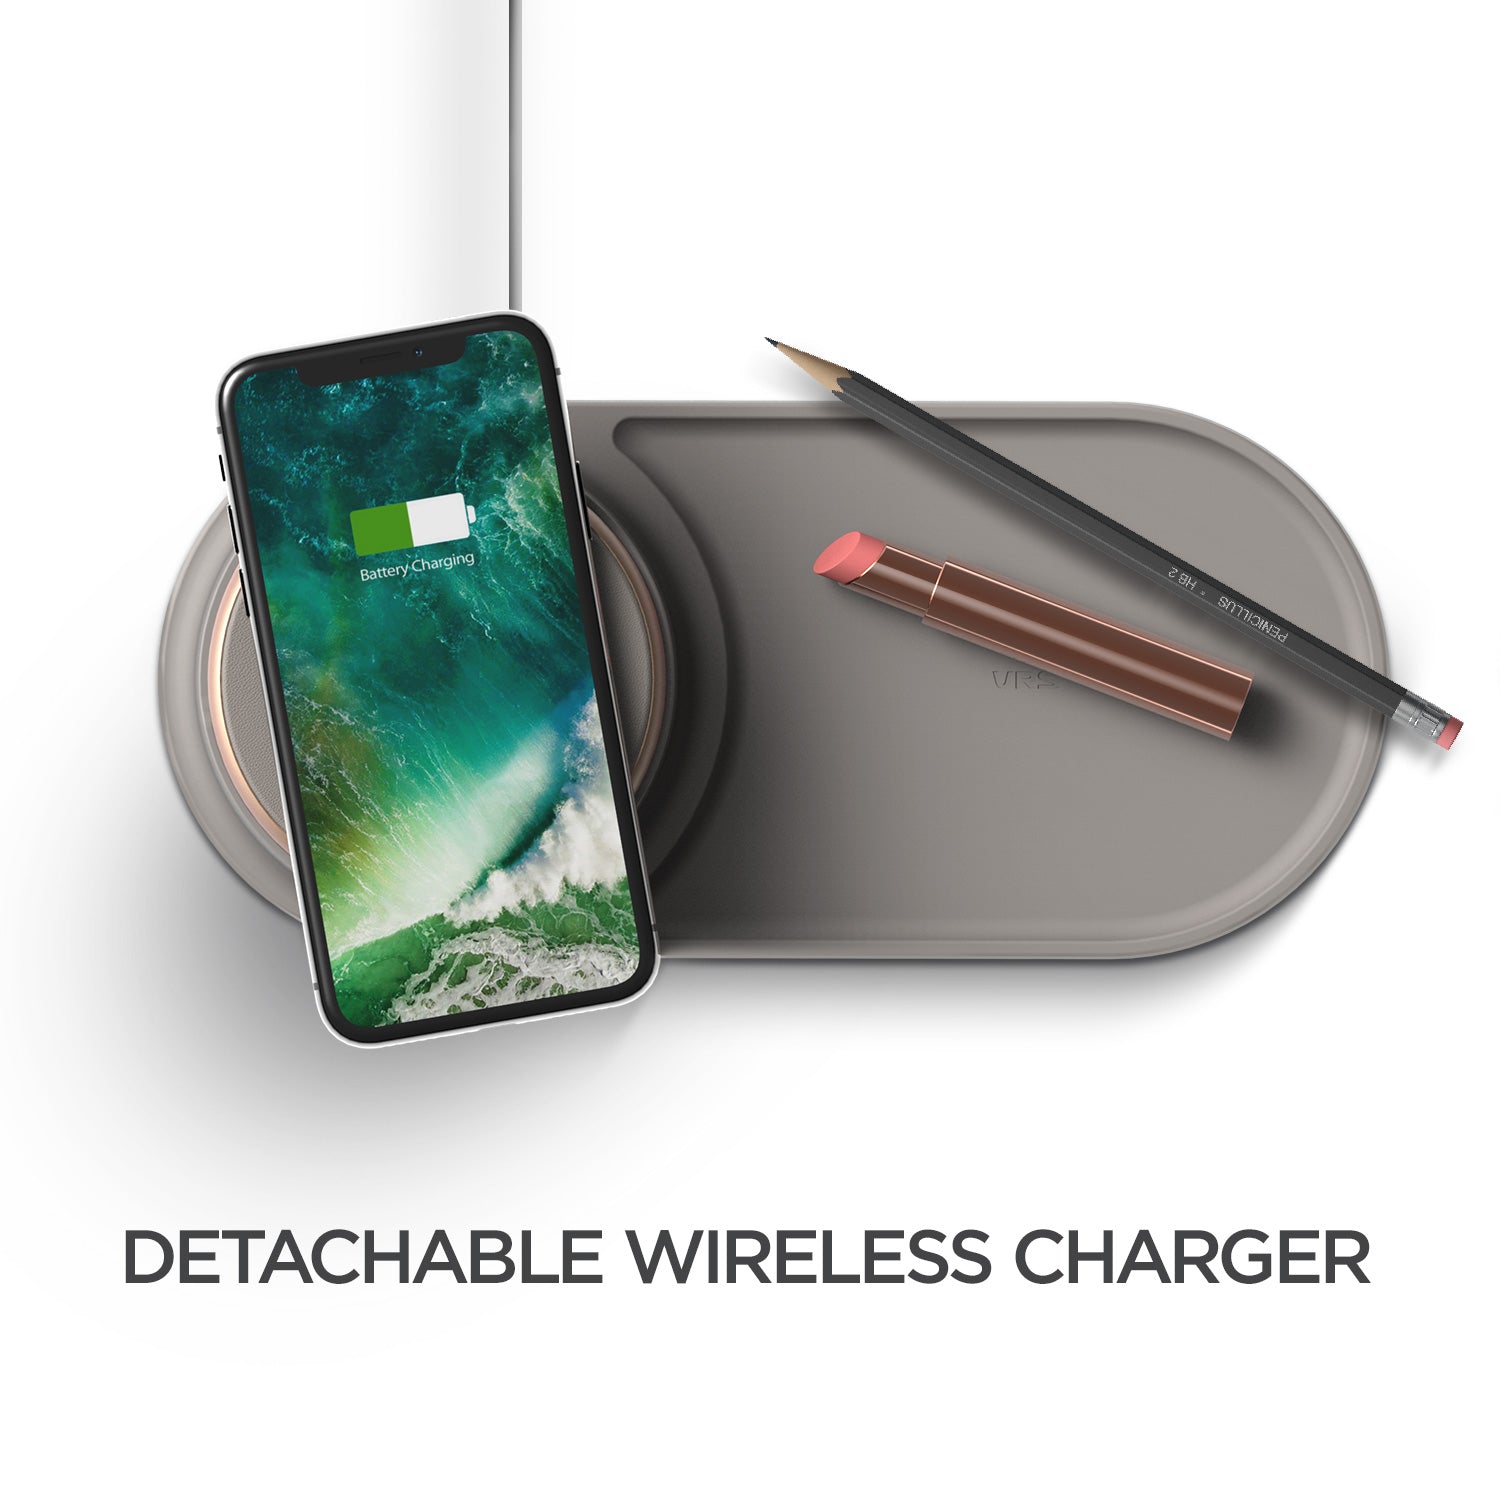 Sleek minimalist wireless charger designed to provide fast and convenient charging without the need for cables.